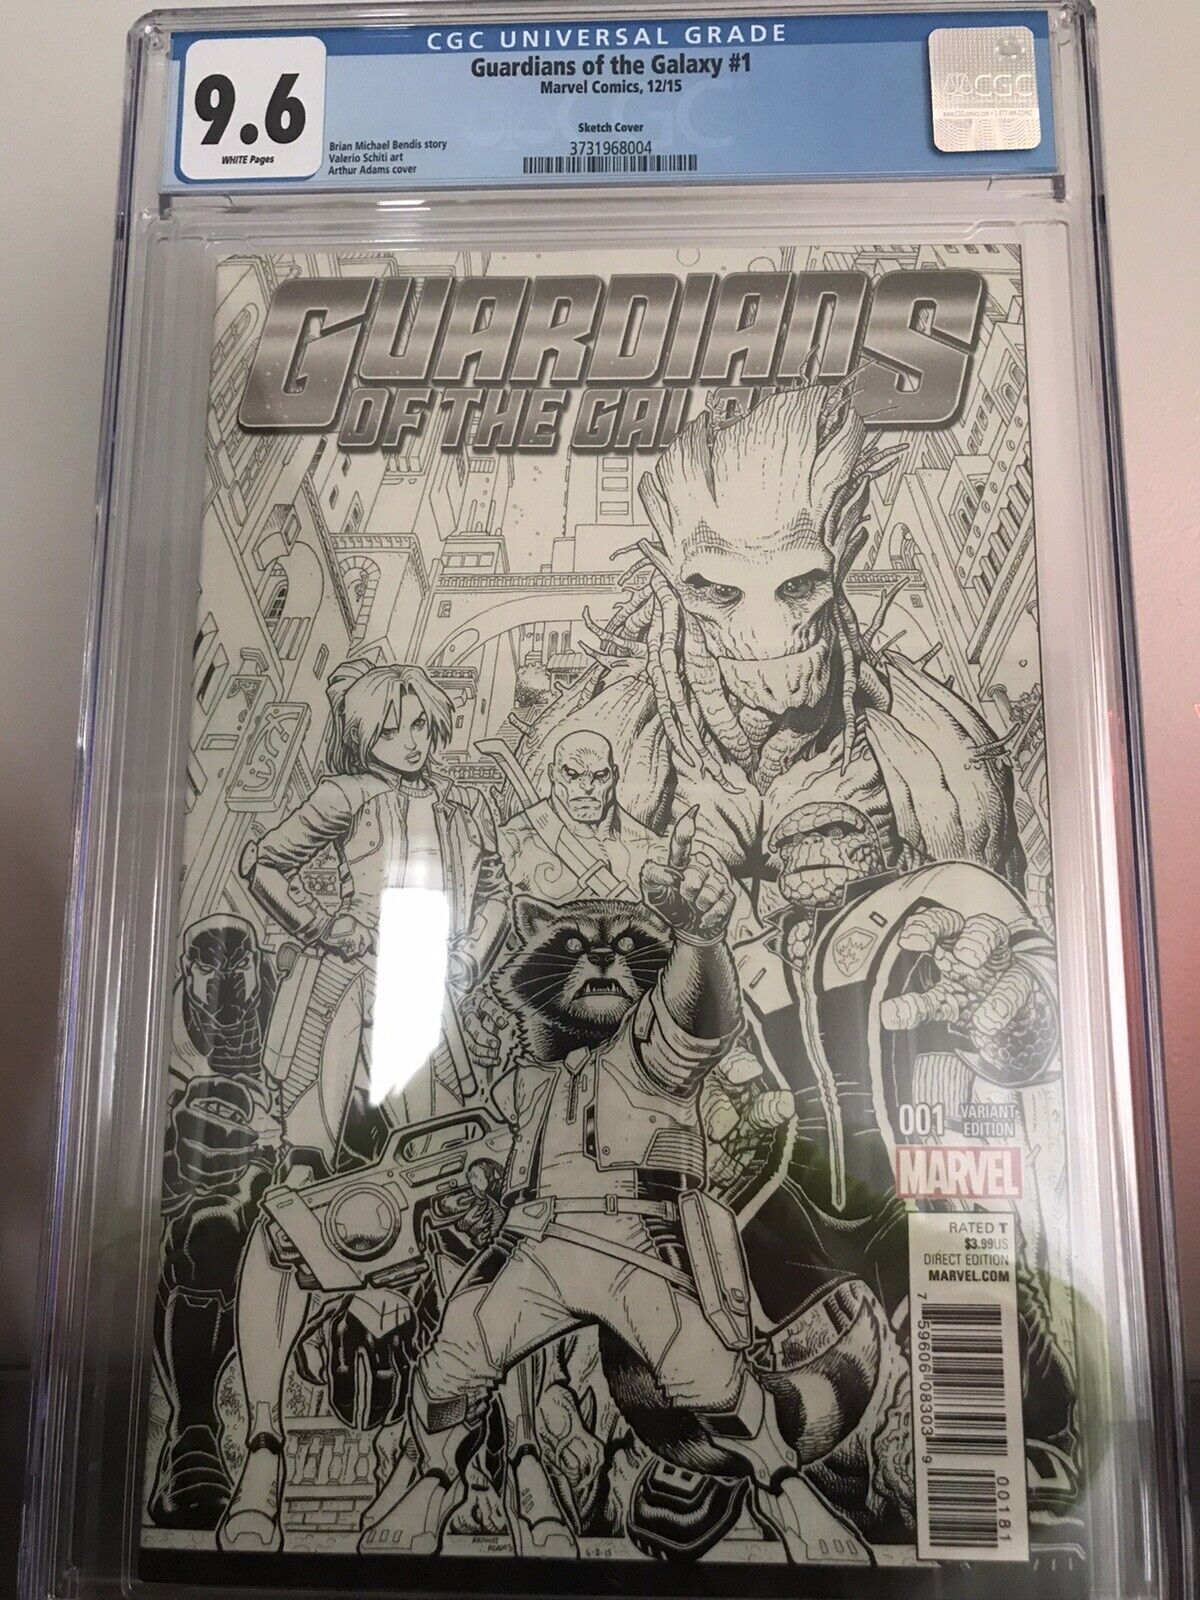 Guardians of the Galaxy #1 Sketch Cover CGC 9.6